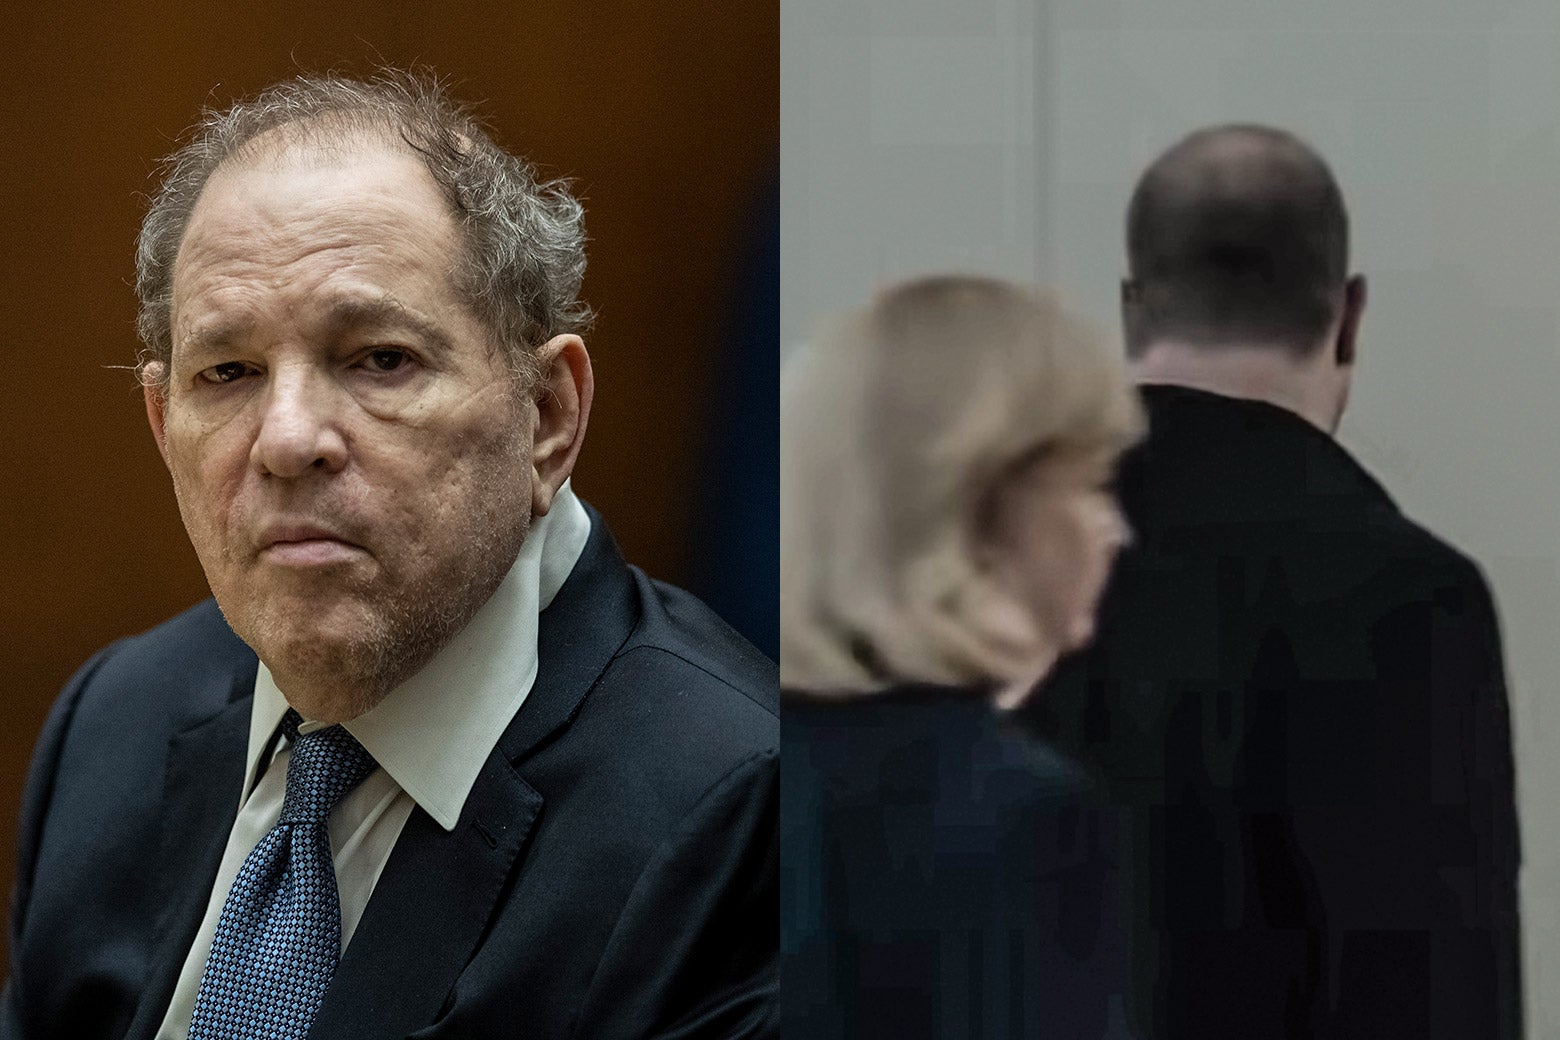 On the left, a disheveled looking Weinstein in court. On the right, all you can see is the back of a large man’s head as he walks away.